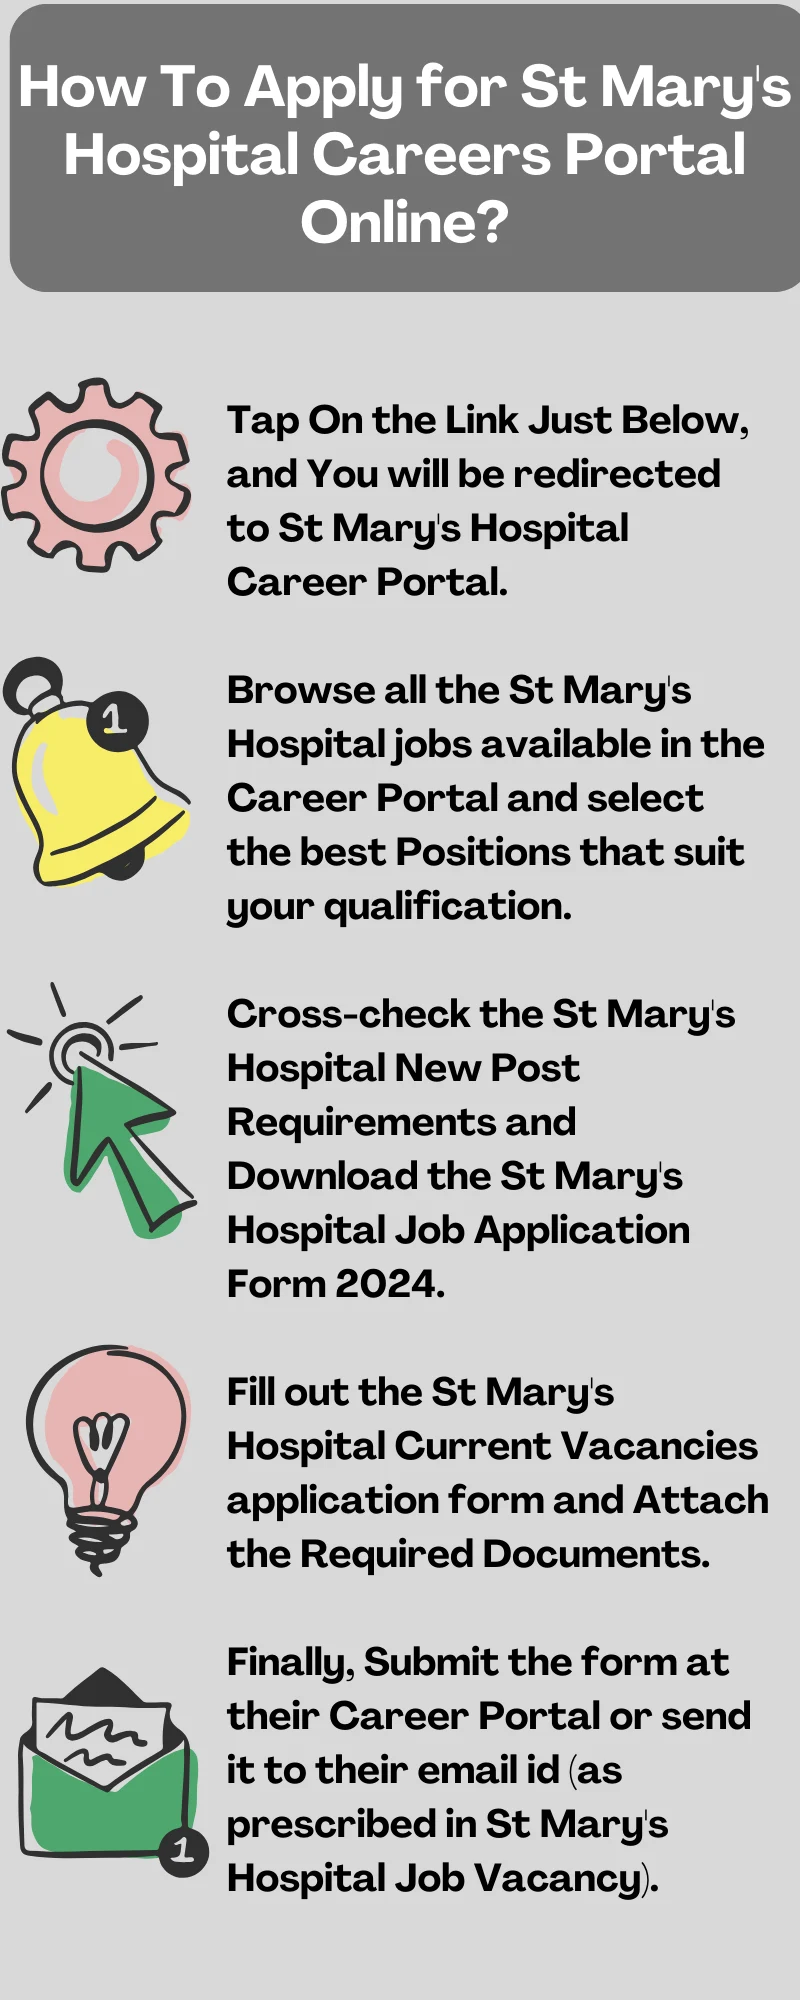 How To Apply for St Mary's Hospital Careers Portal Online?